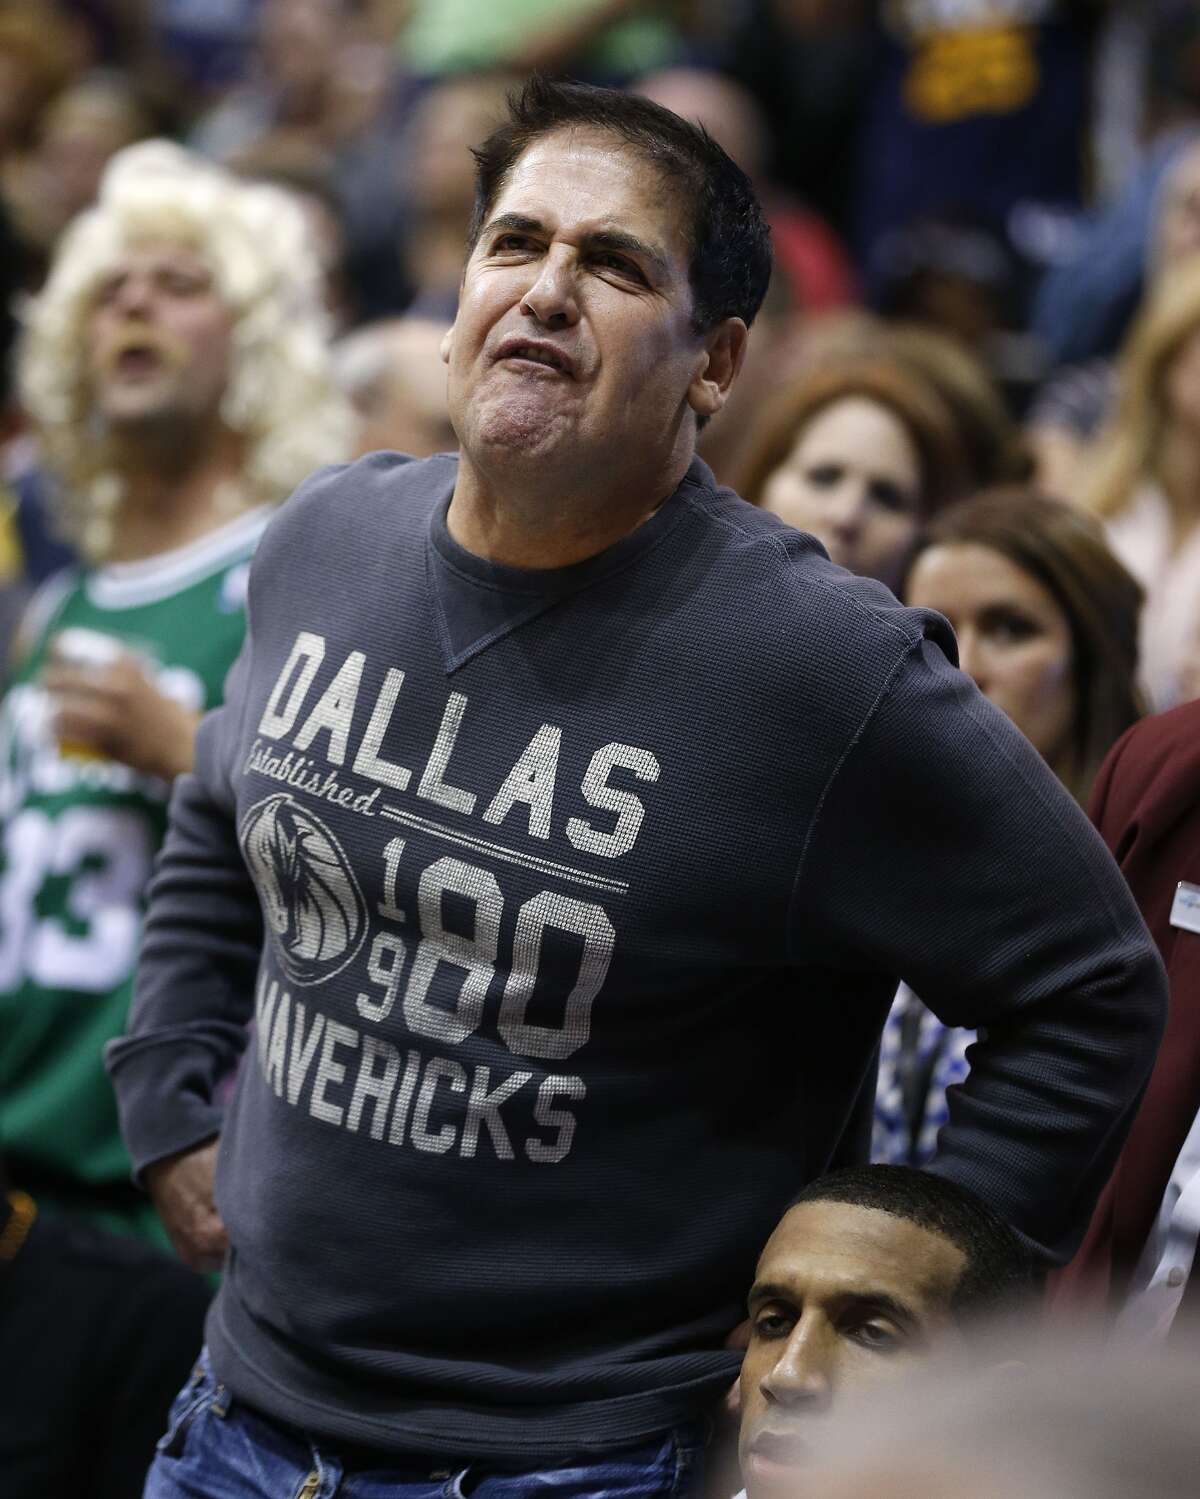 SALT LAKE CITY, UT - OCTOBER 31: Owner of Dallas Mavericks, Mark Cuban, yells at the officials during a game against the Utah Jazz during the second half of an NBA game October 31, 2012 at EnergySolution Arena in Salt Lake City, Utah. NOTE TO USER: User expressly acknowledges and agrees that, by downloading and or using this photograph, User is consenting to the terms and conditions of the Getty Images License Agreement. (Photo by George Frey/Getty Images)